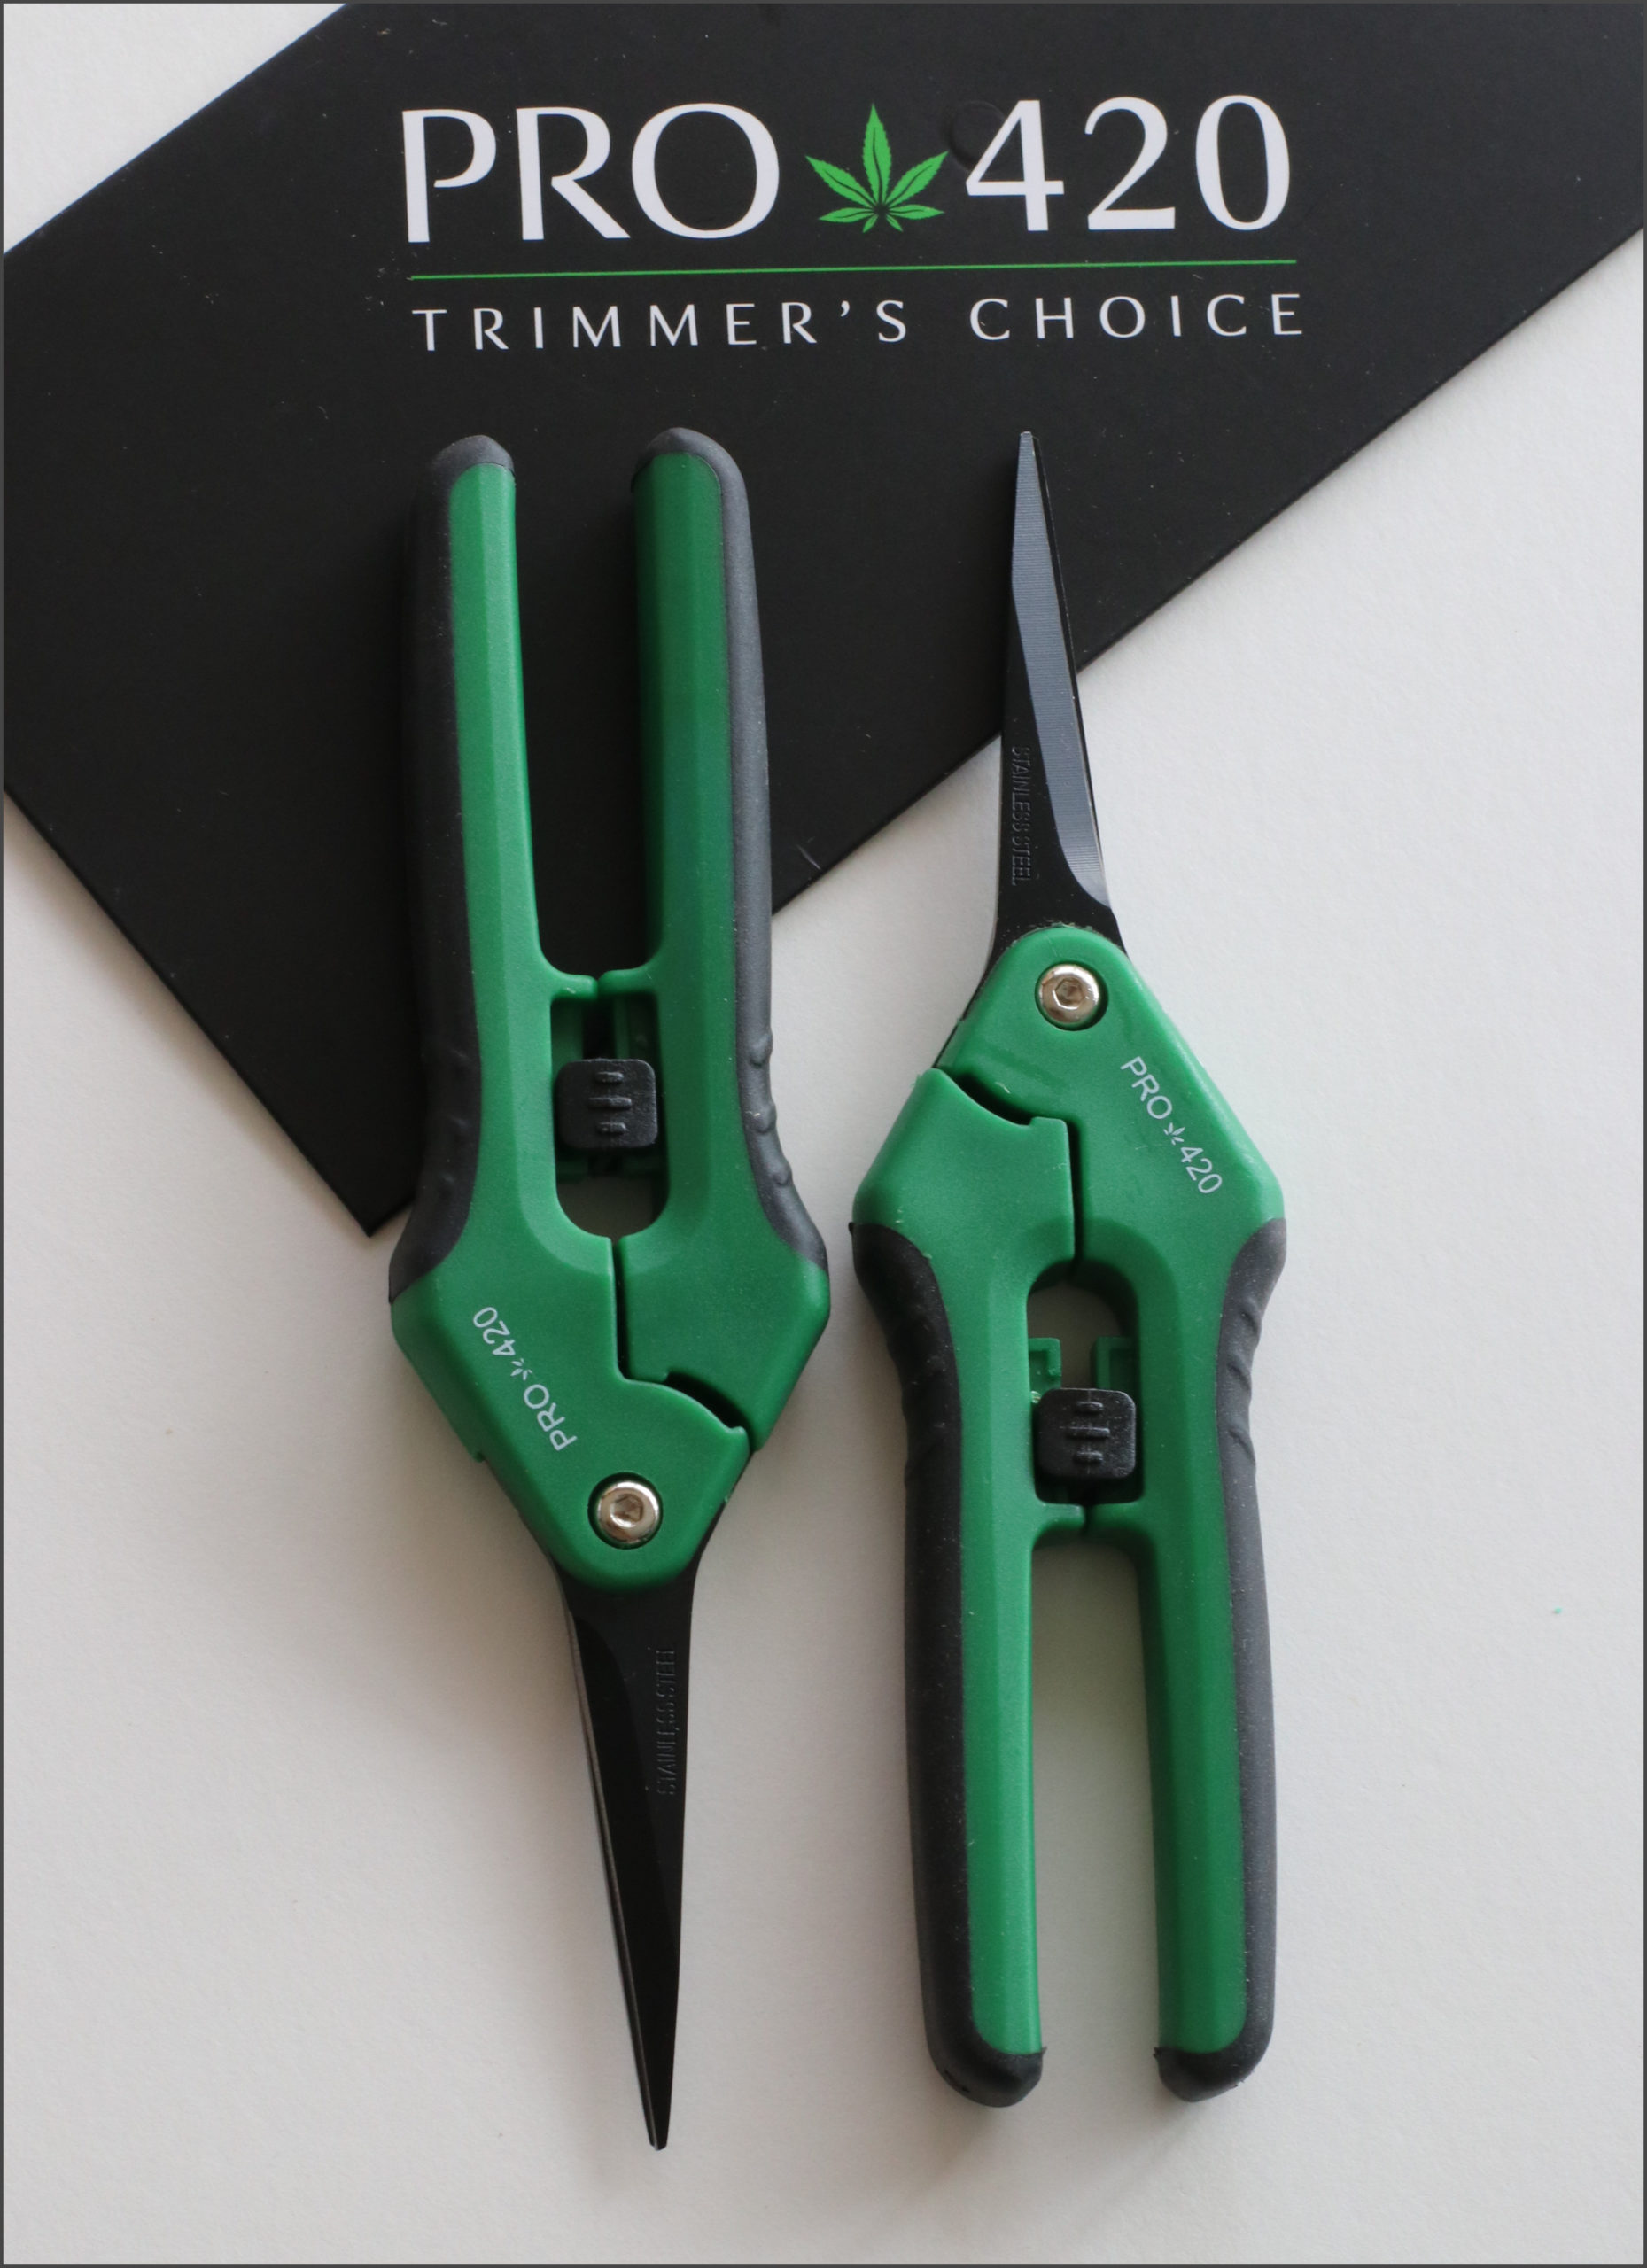 PRO 420 Spring Loaded Scissors Trimmer's Choice- 6 Pack PRUNING/TRIM/HARVEST